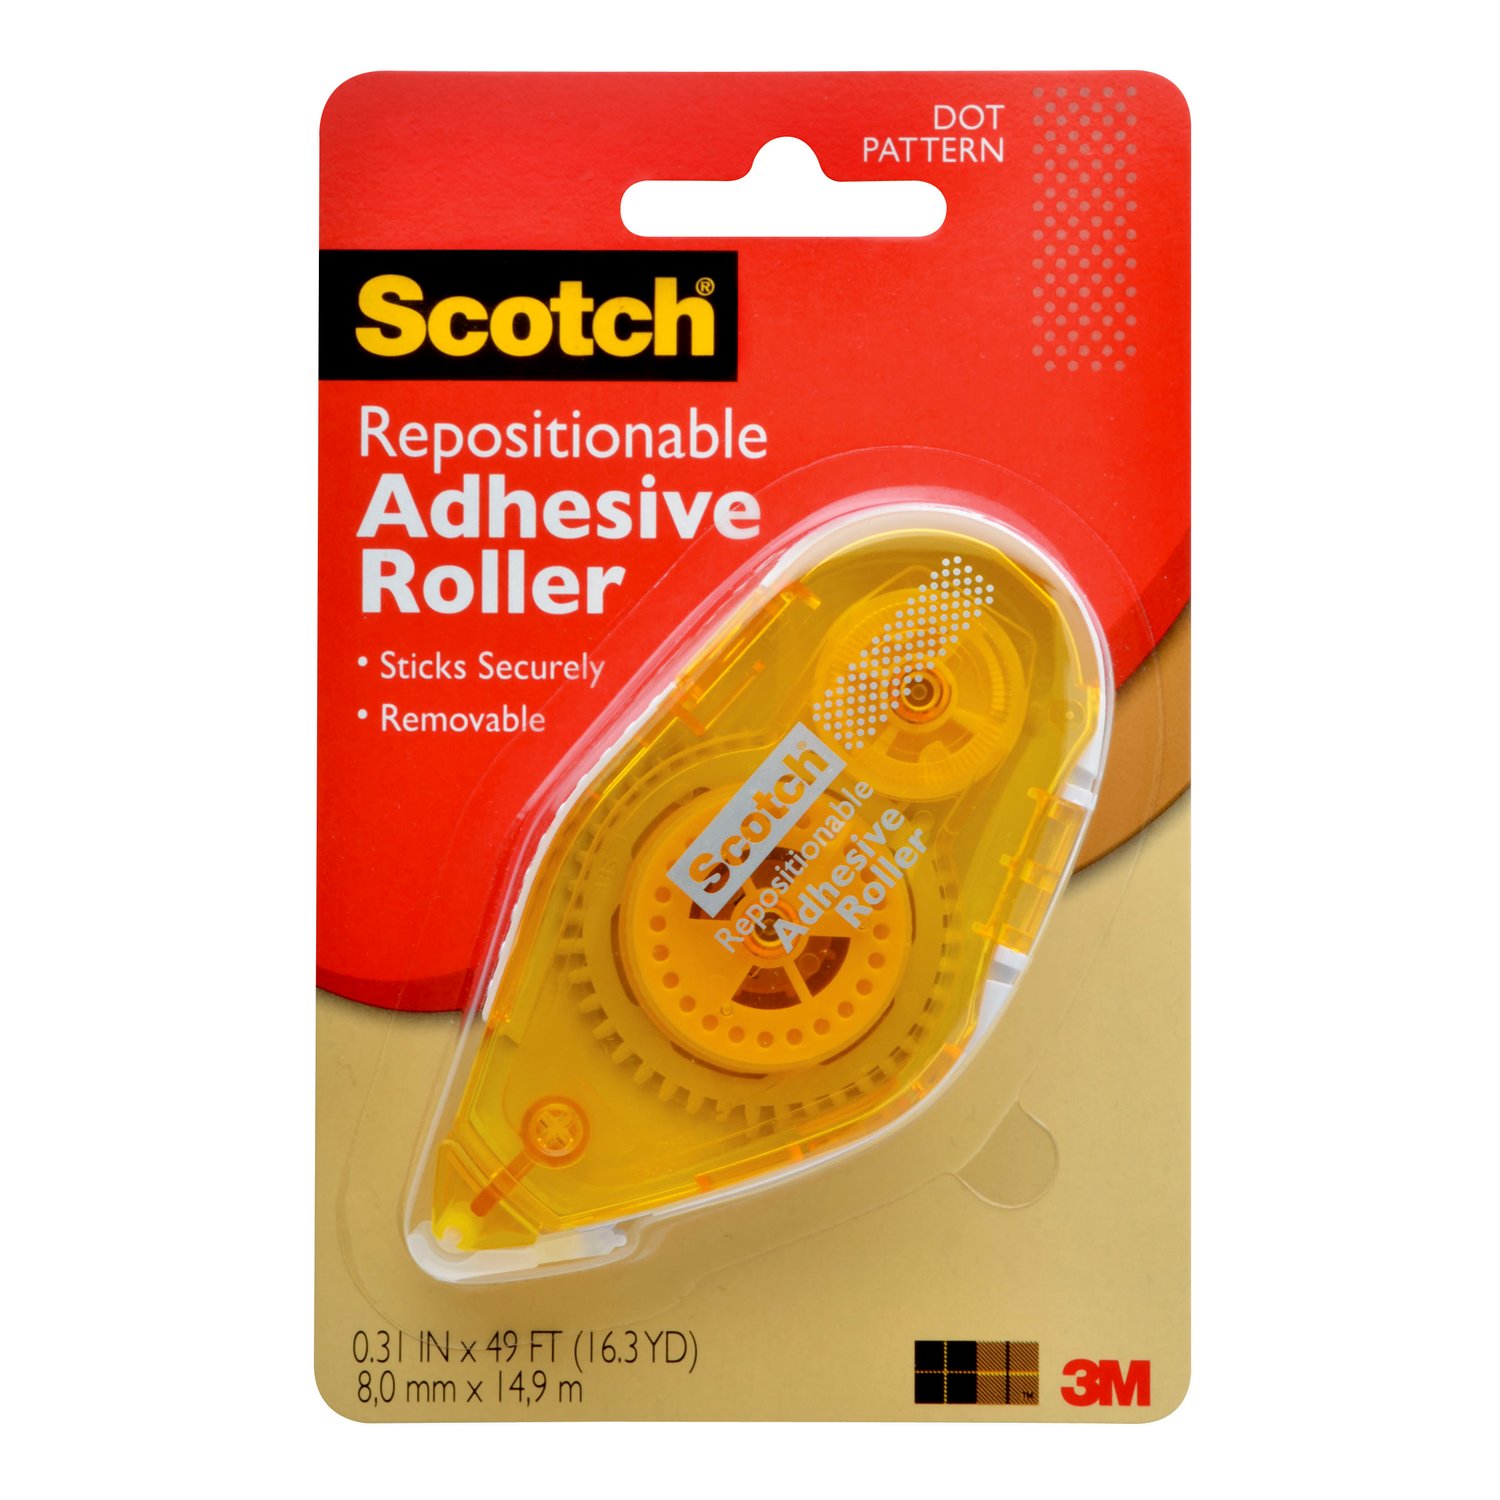 7100256688 - Scotch Adhesive Roller Repositionable 6055-RPS, .31 in x 49 ft